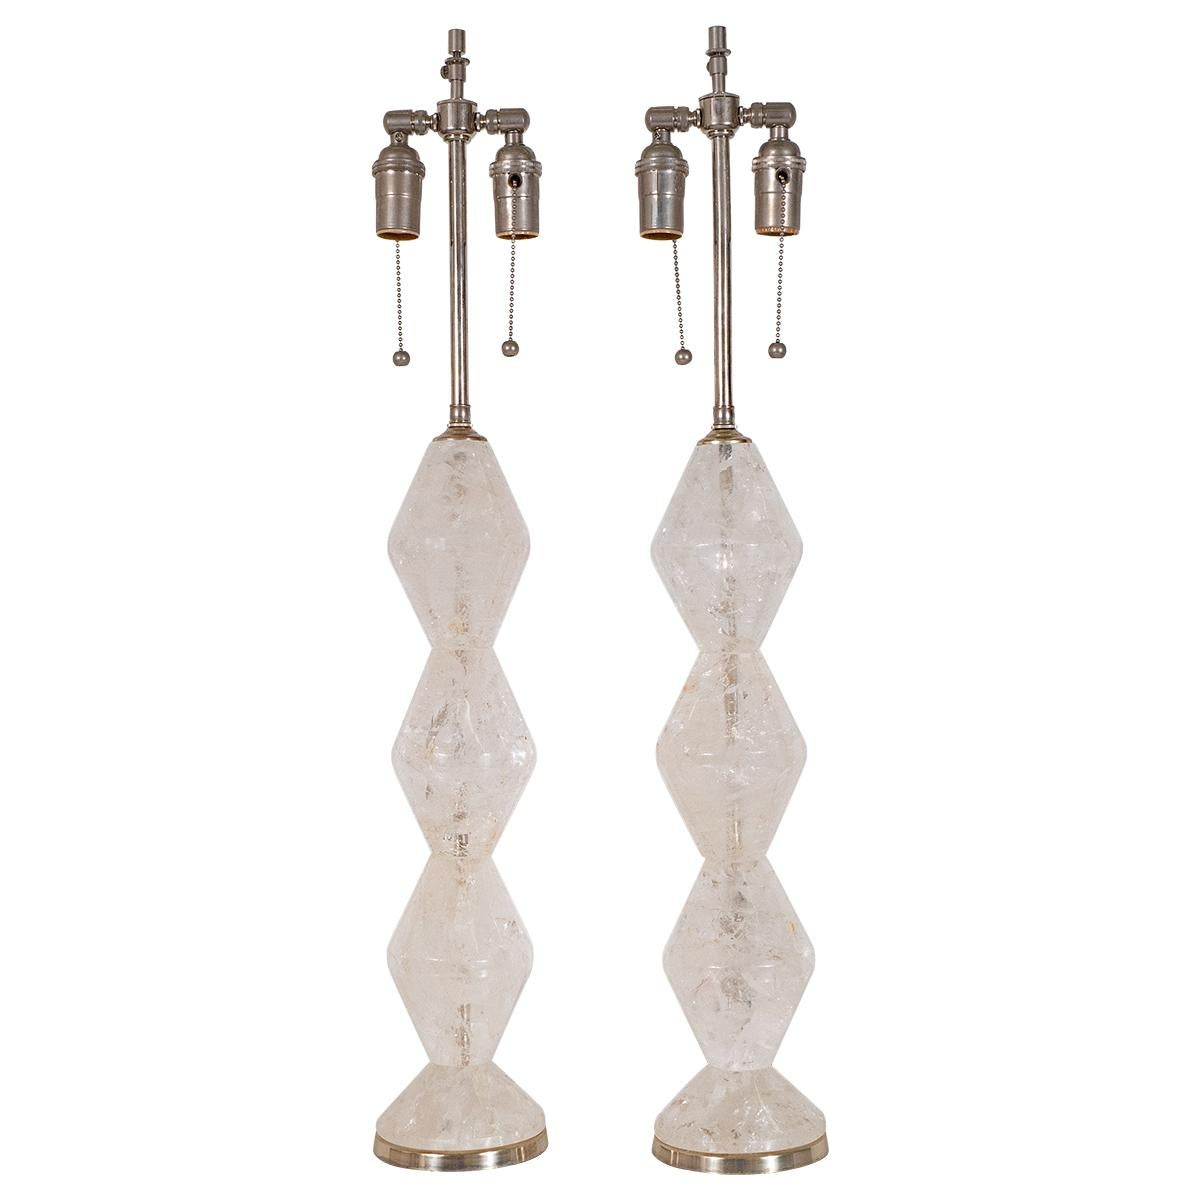 Pair of rock crystal tables lamps with stacked diamond design and nickel hardware.